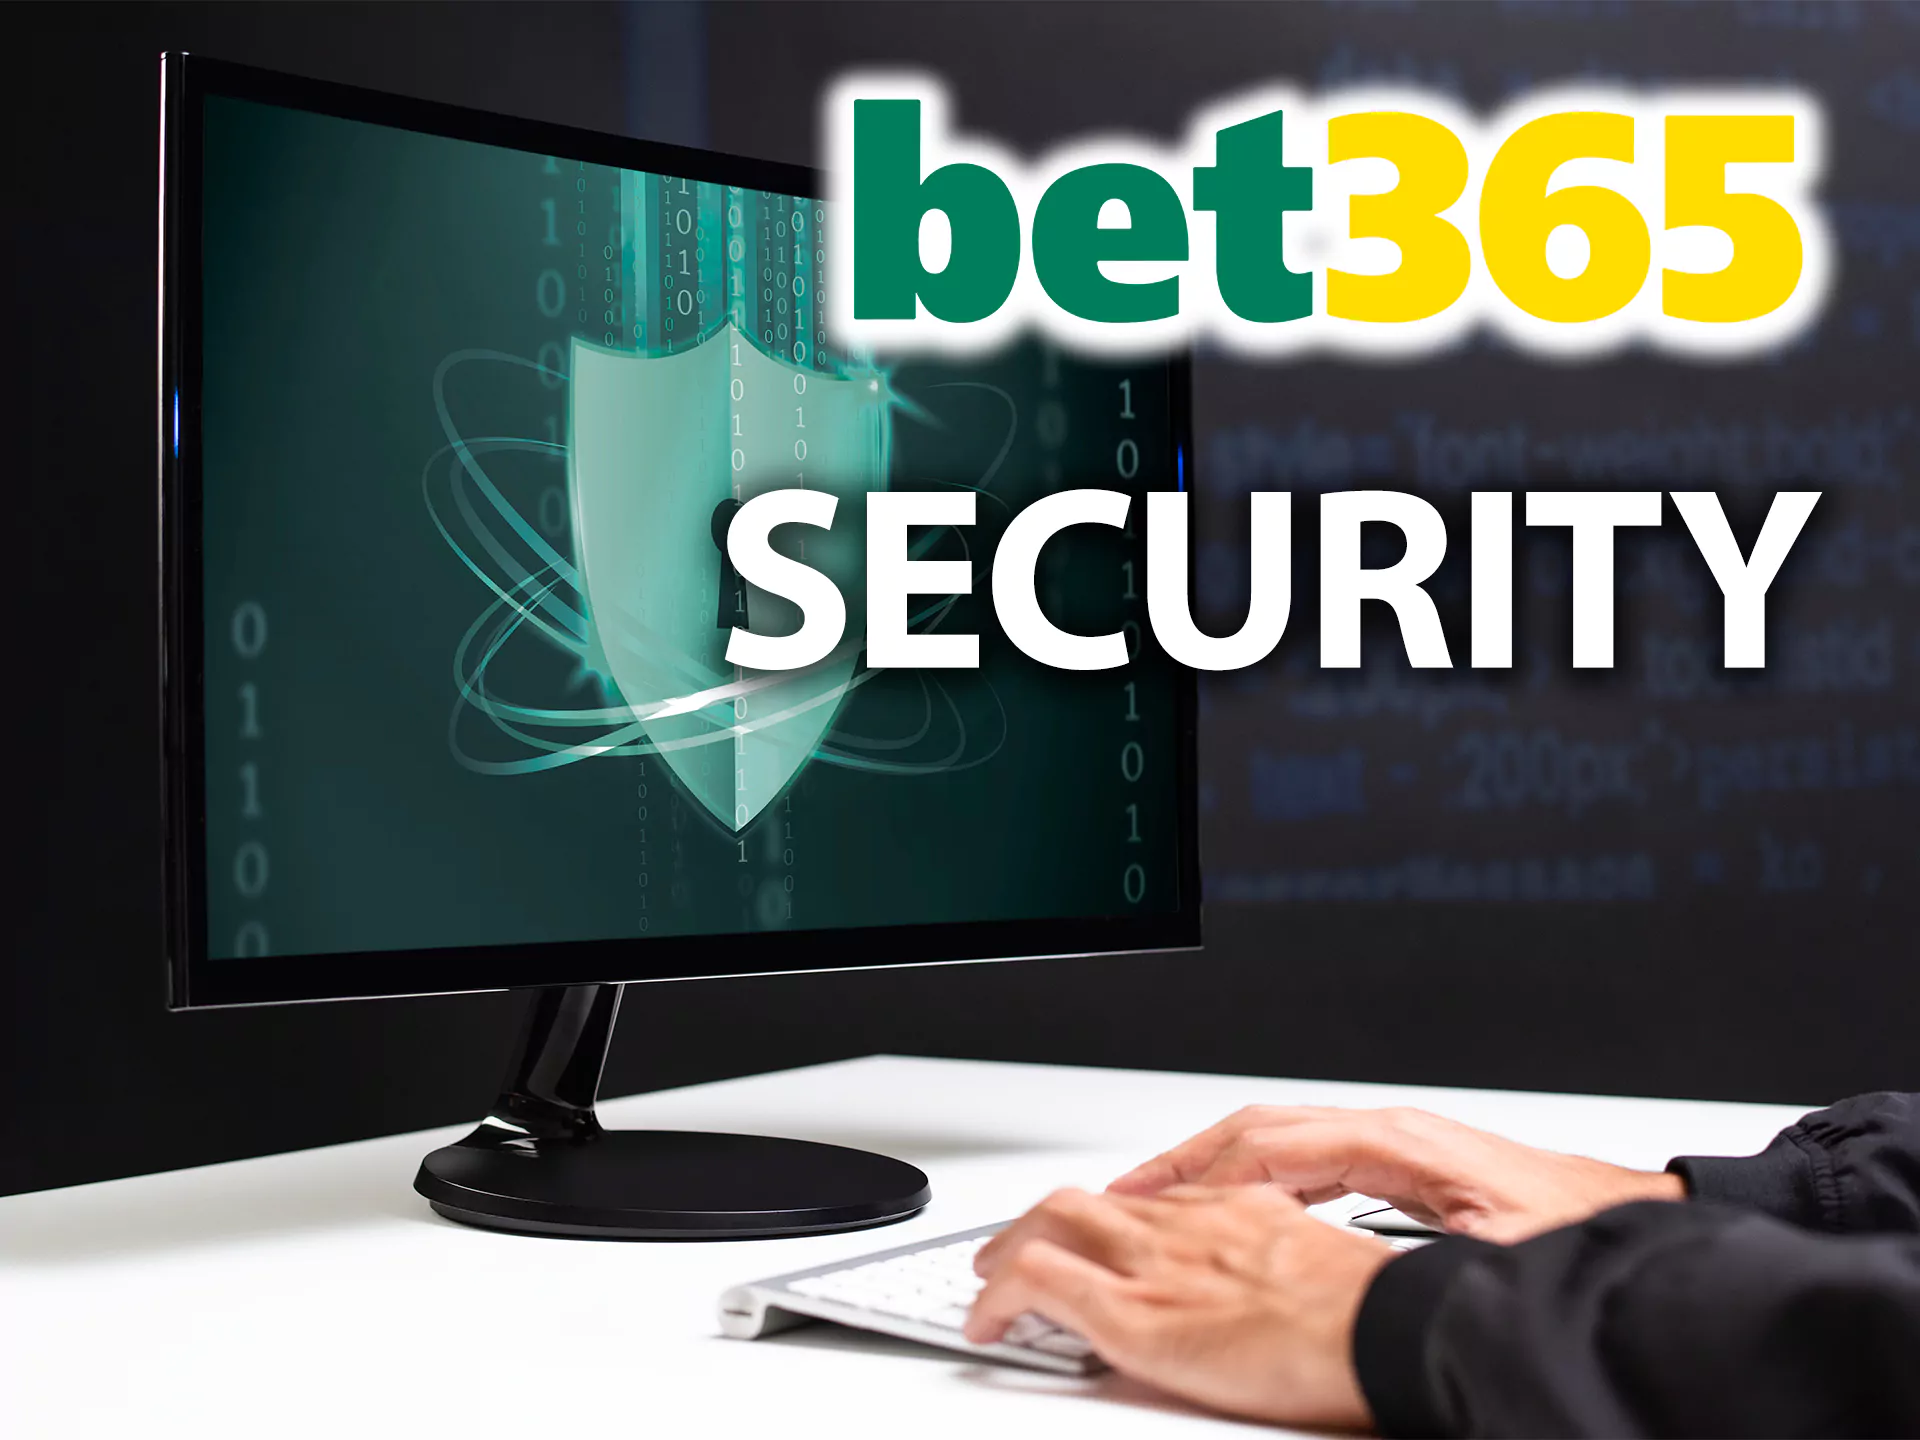 It's safe to bet at Bet365.